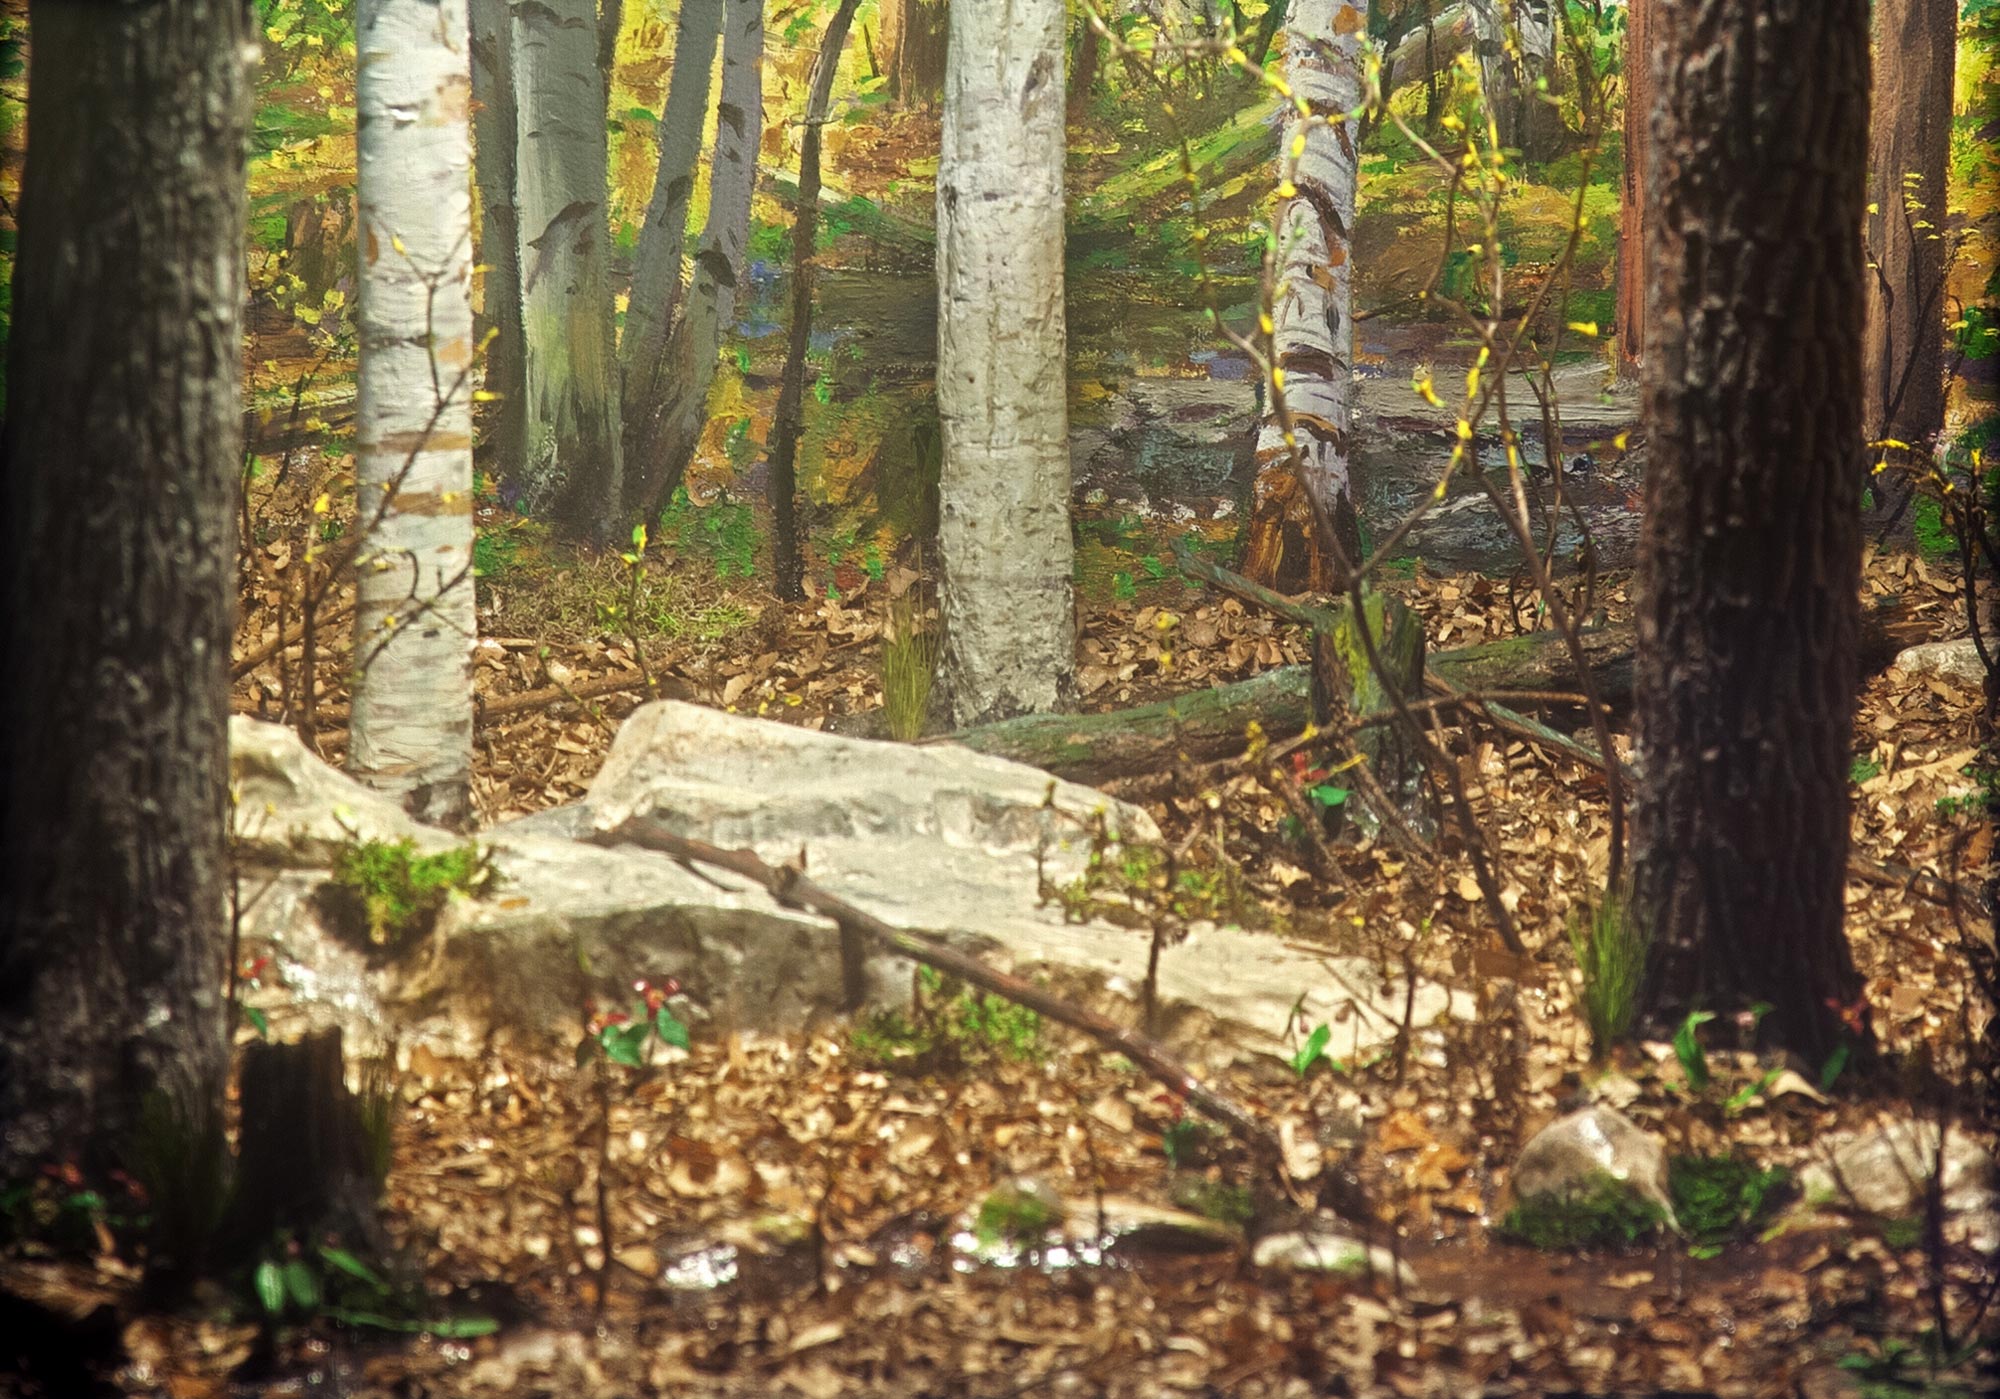 Diorama of the woods during the summer season.